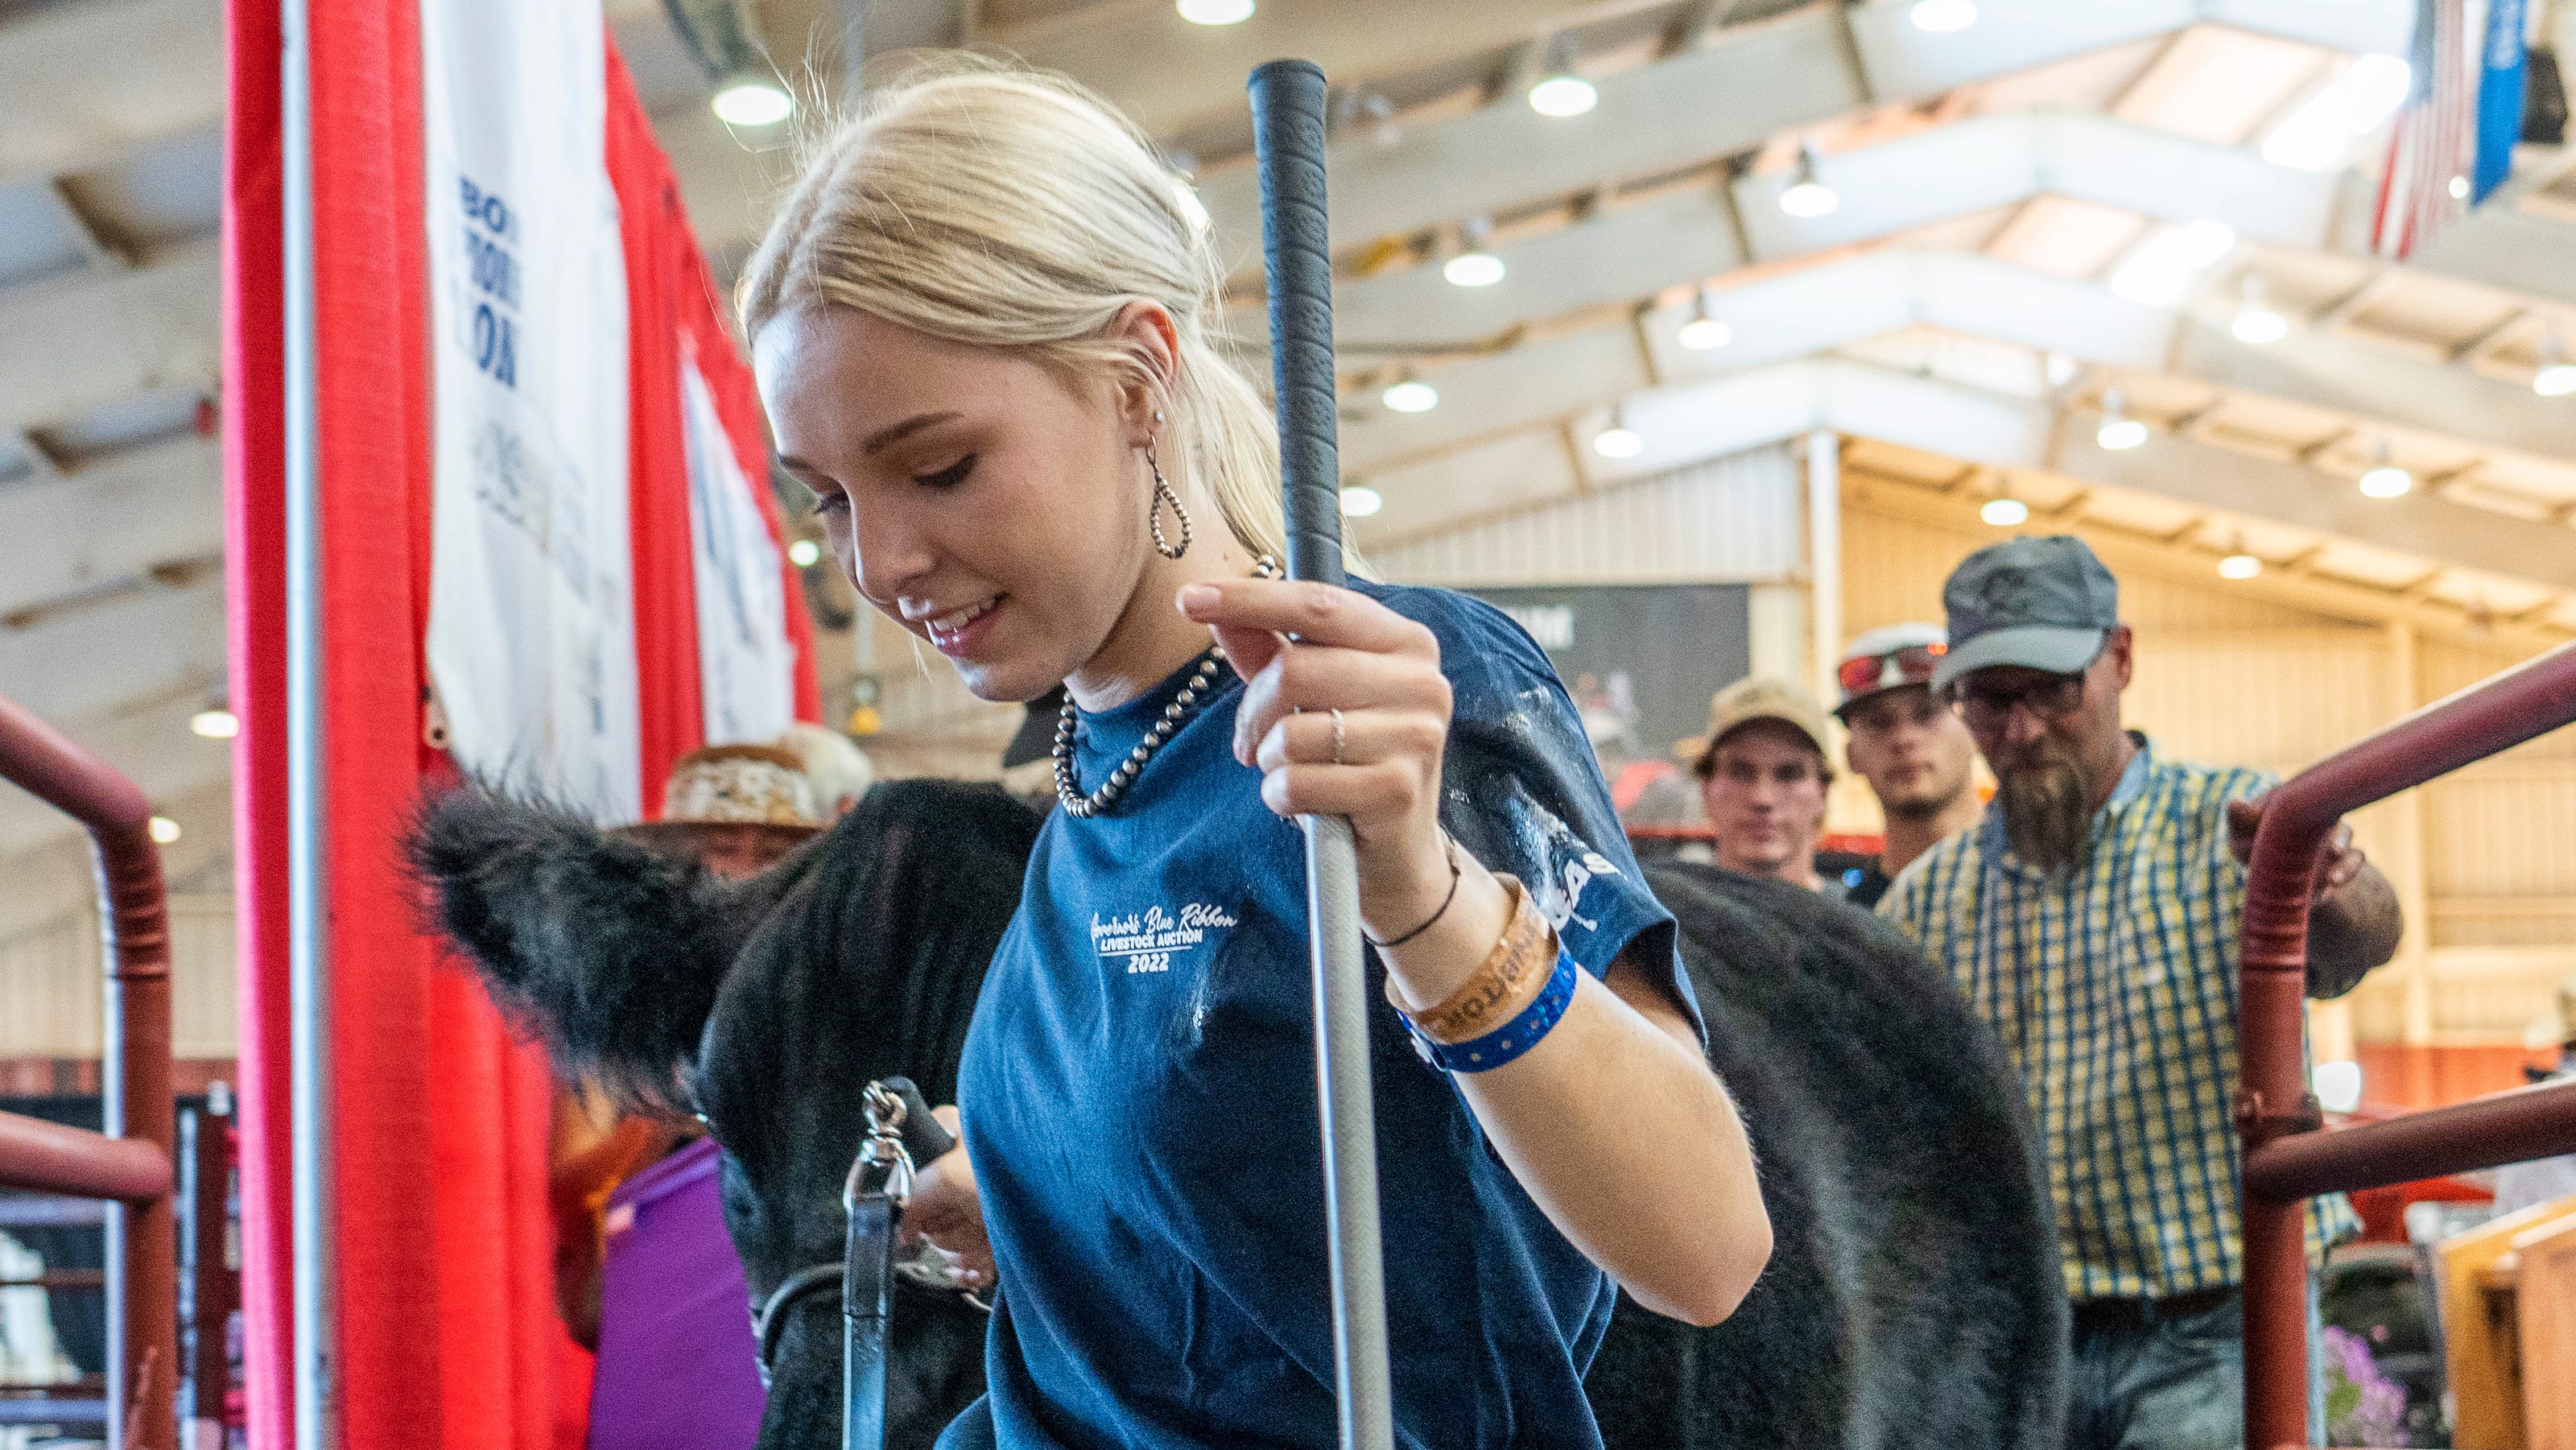 Governor's Blue Ribbon Livestock auction at State Fair nets $321,950, passing 2021 numbers